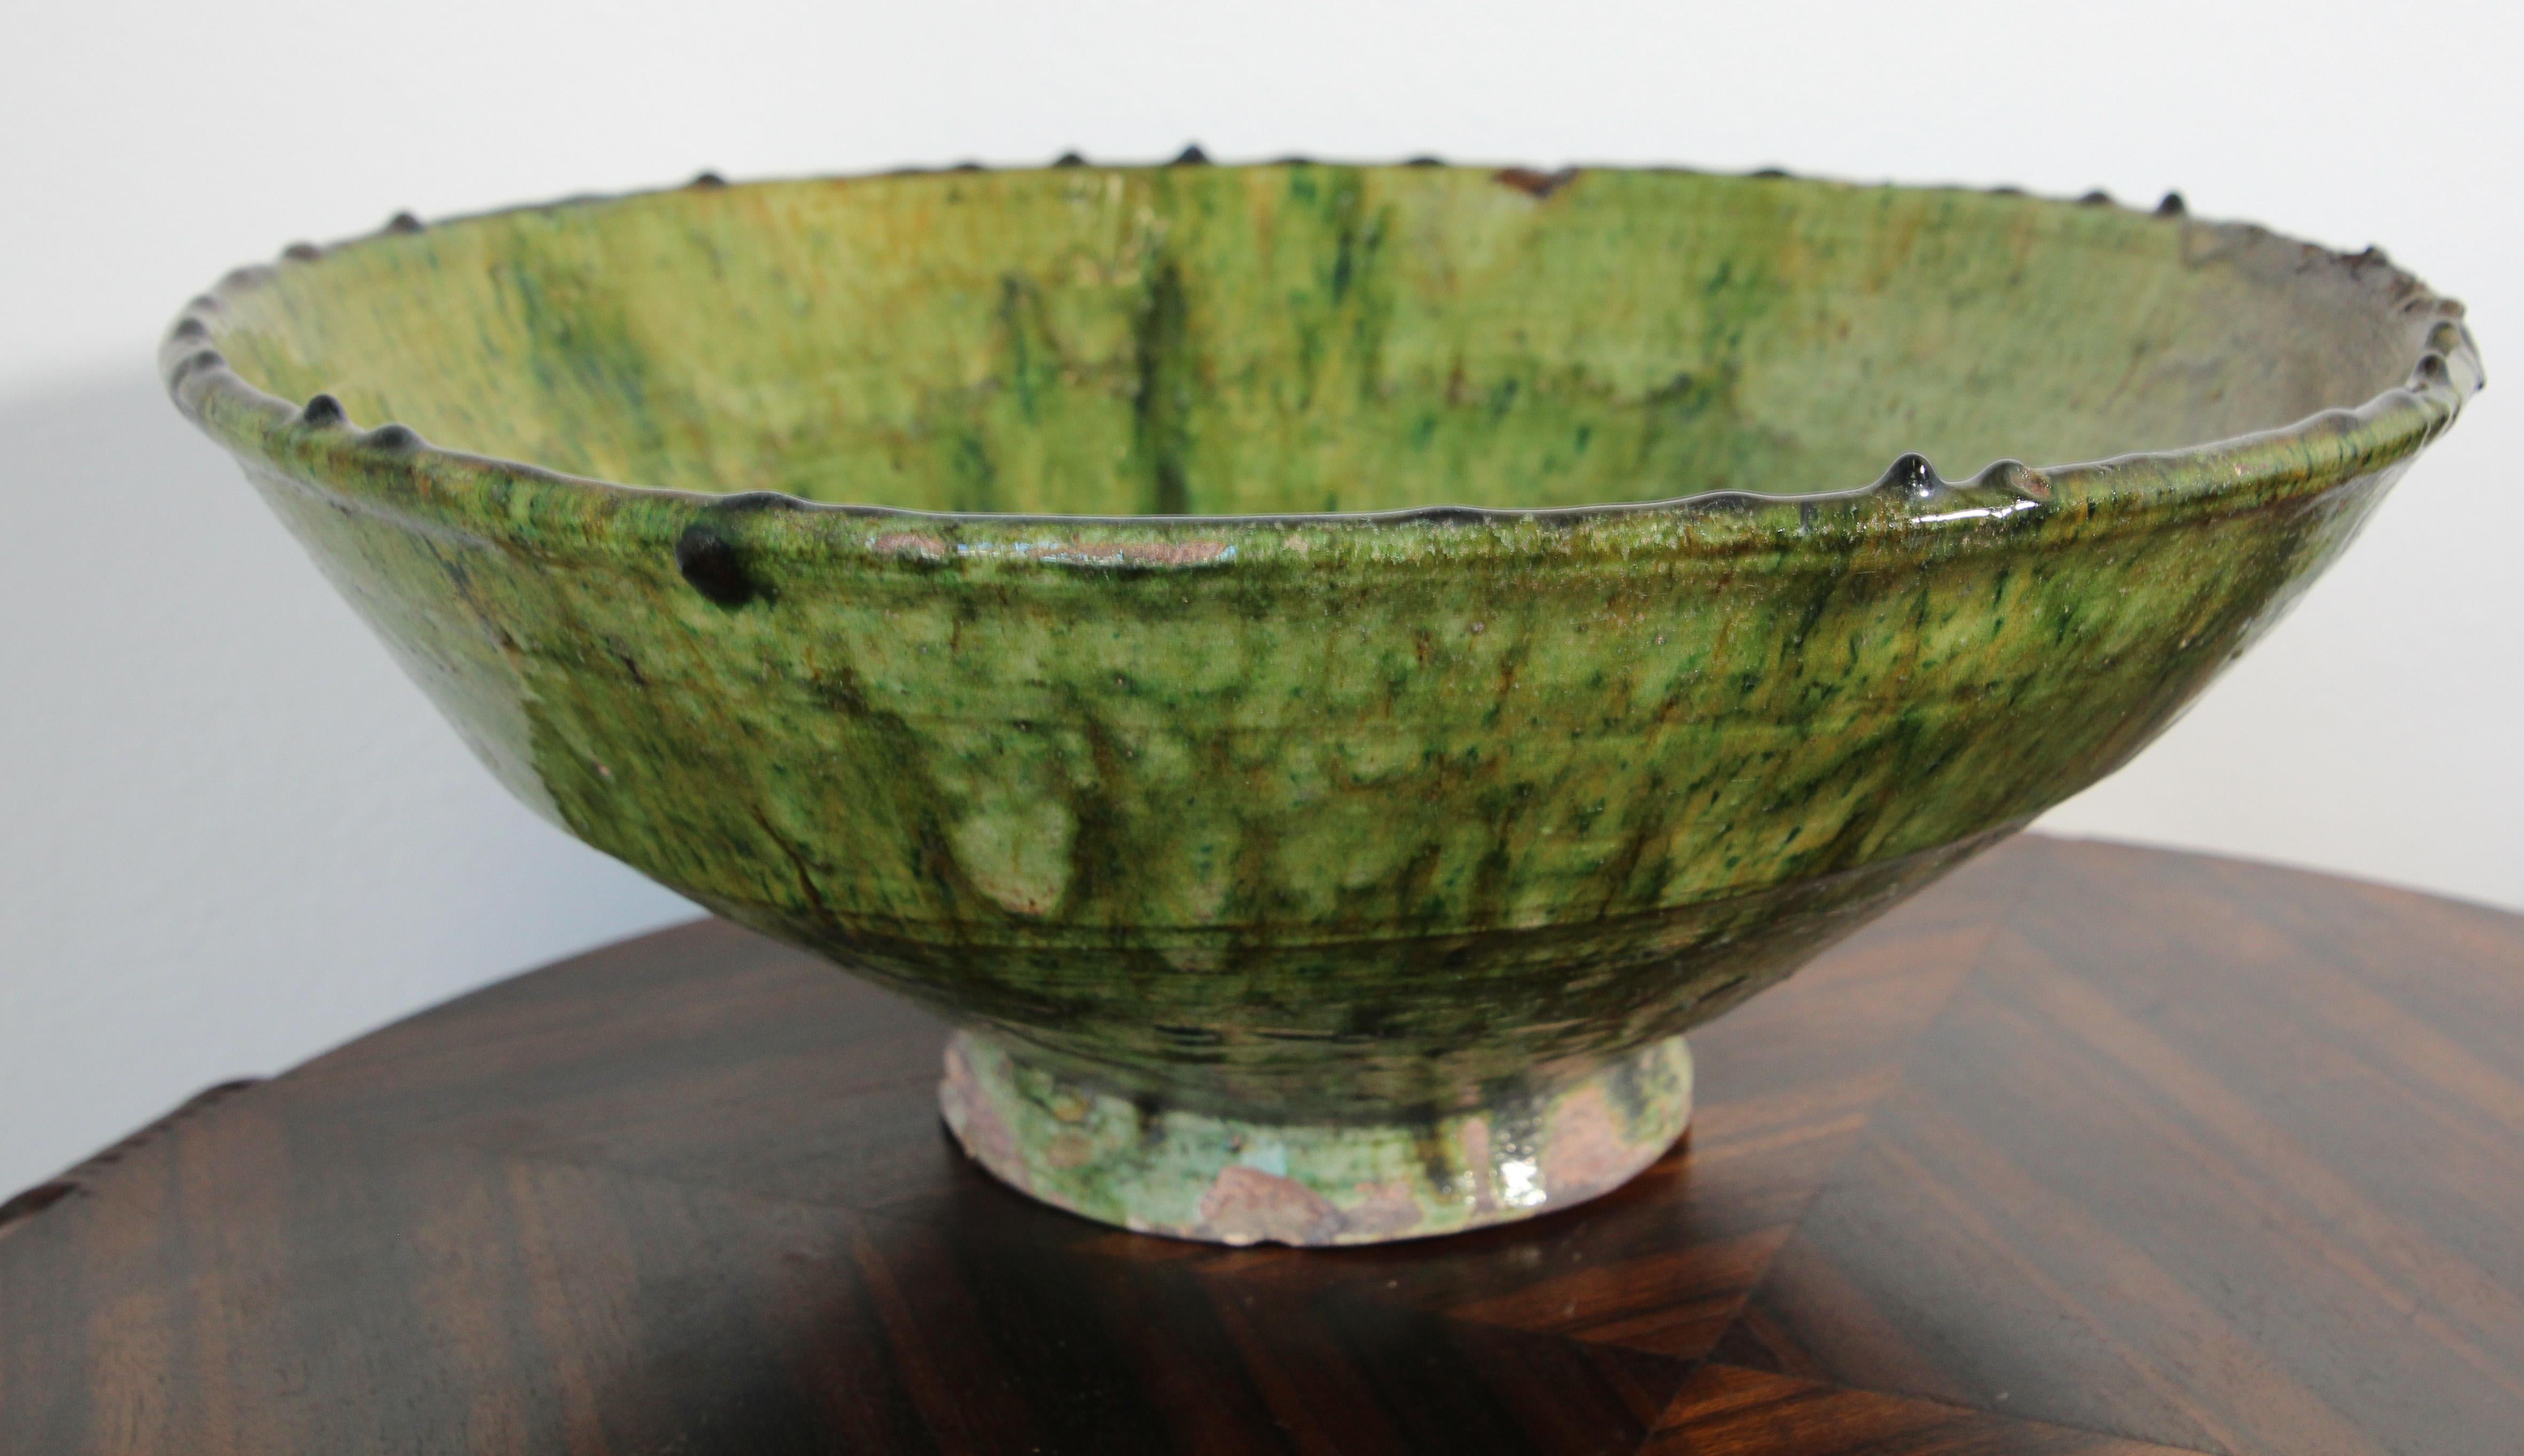 Large heavy Moroccan Tamgroute Tribal green terracotta glazed bowl.
Very large avocado green glazed earthenware bowl from Morocco.
Antique Moroccan Berber Tamgroute green glazed decorative terra cotta large decorative bowl.
Wonderful green and brown